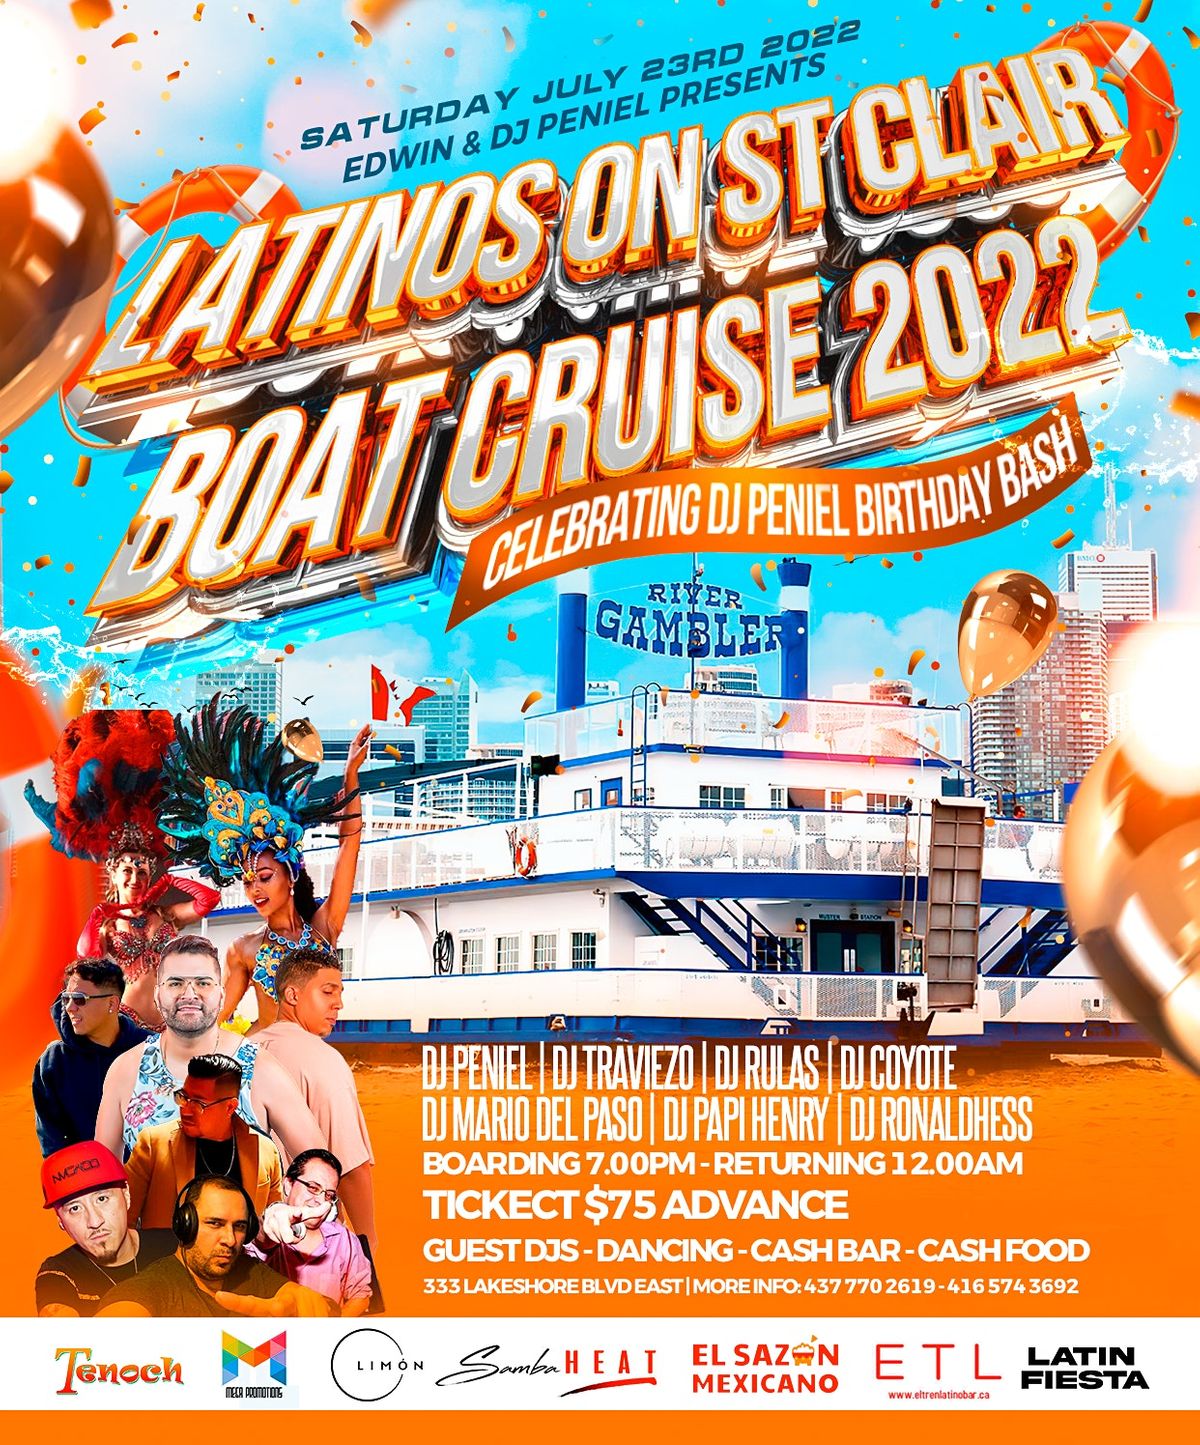 Latinos On St Clair Boat Cruise 2022